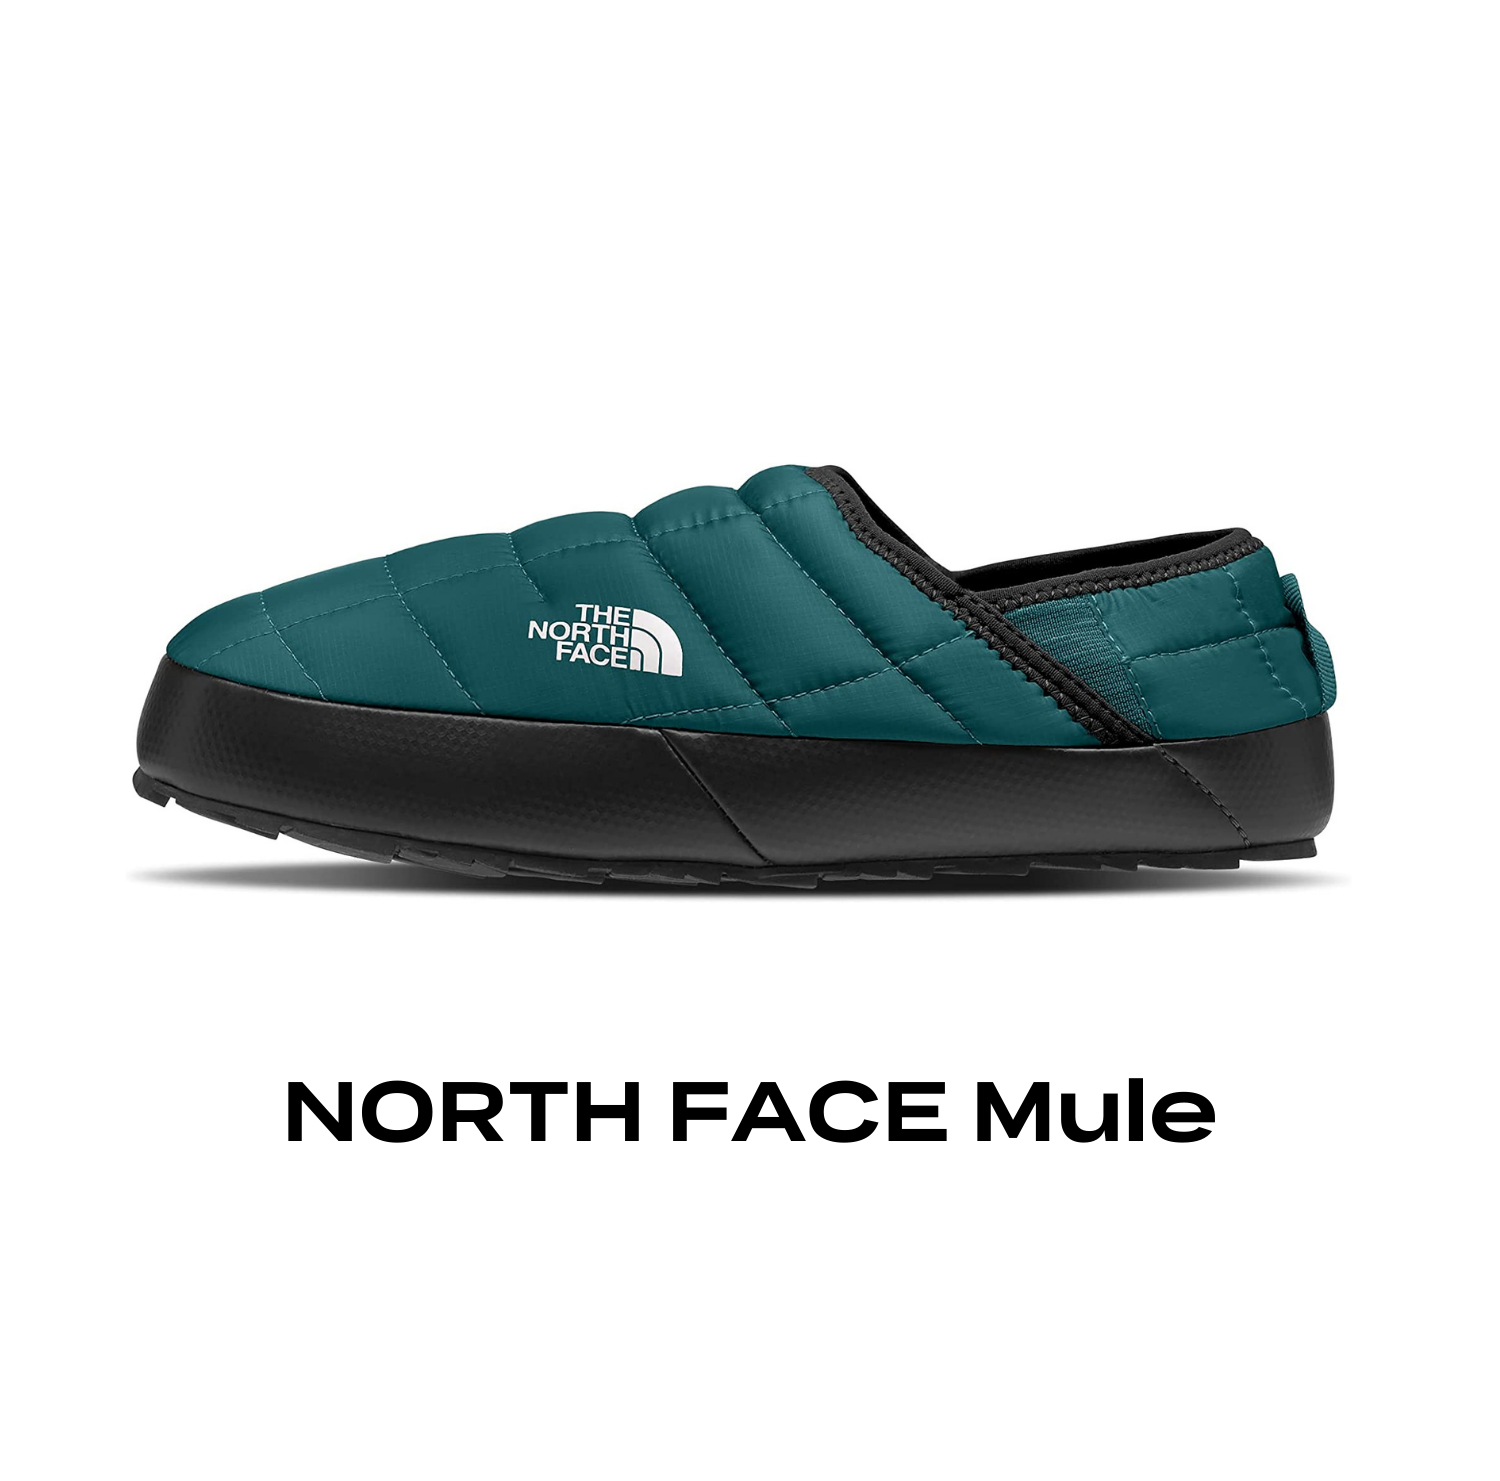 A graphic for a North Face mule shoe, a great mother's day gift.